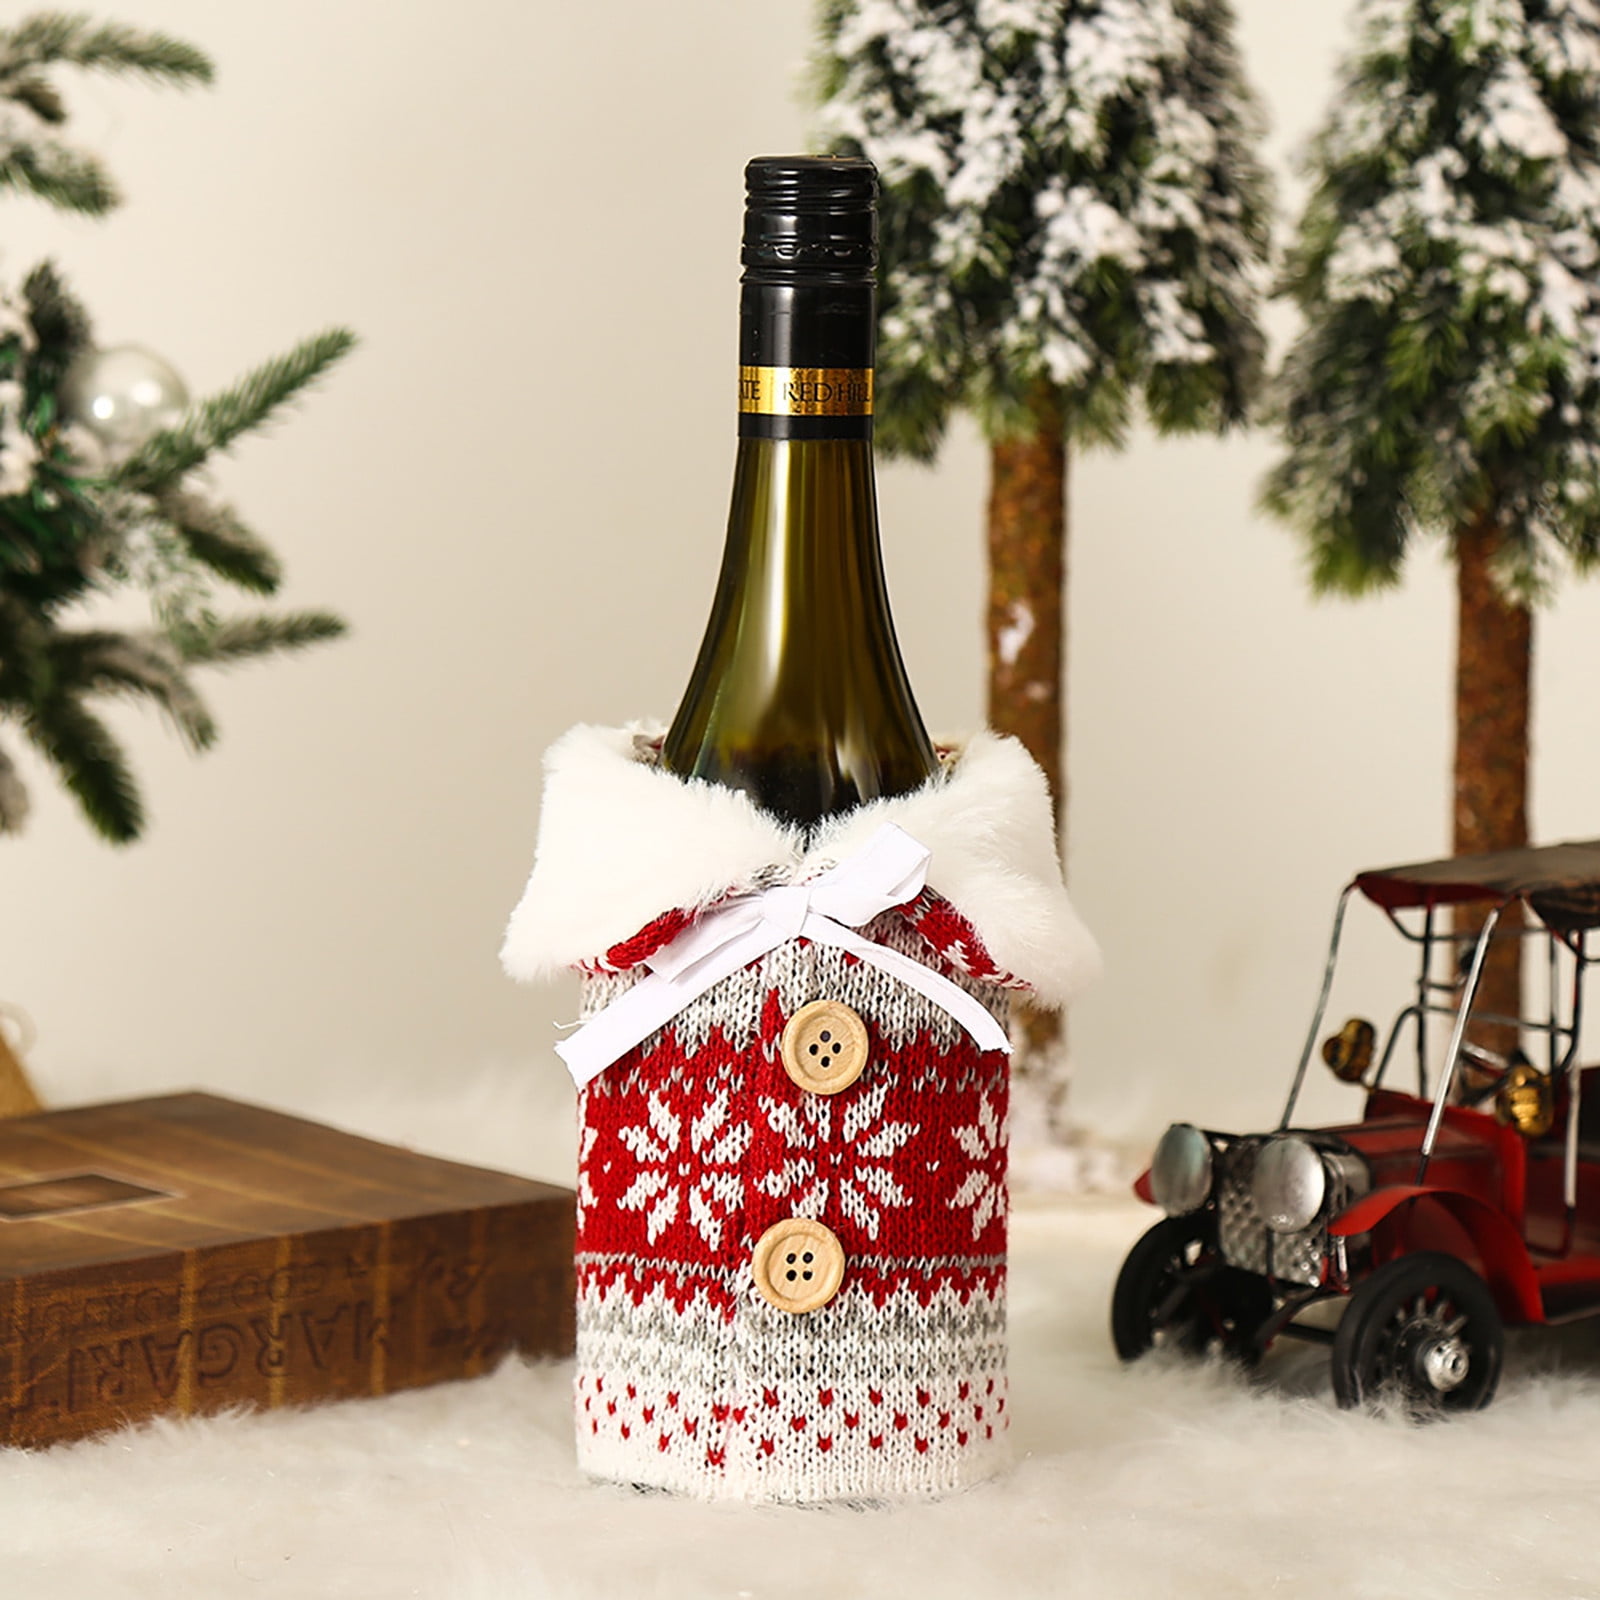 Hokic 3pcs Ugly Christmas Sweater Wine Bottle Cover Handmade Christmas Wine Bottle Cover with Hat for Christmas Decorations Xmas Holiday Party Décor 